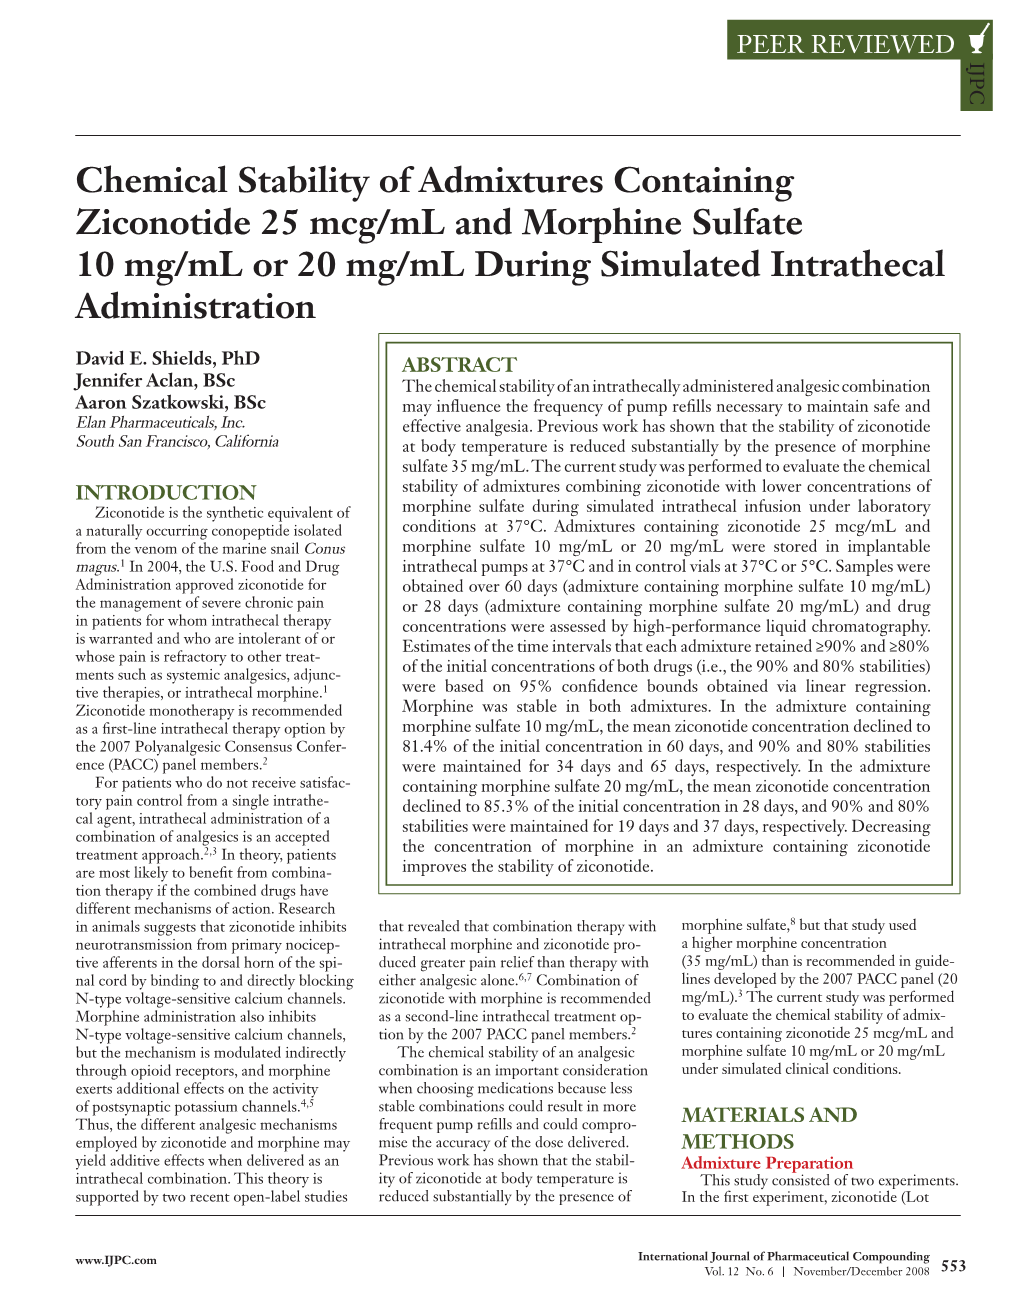 Chemical Stability of Admixtures Containing Ziconotide 25 Mcg-Ml